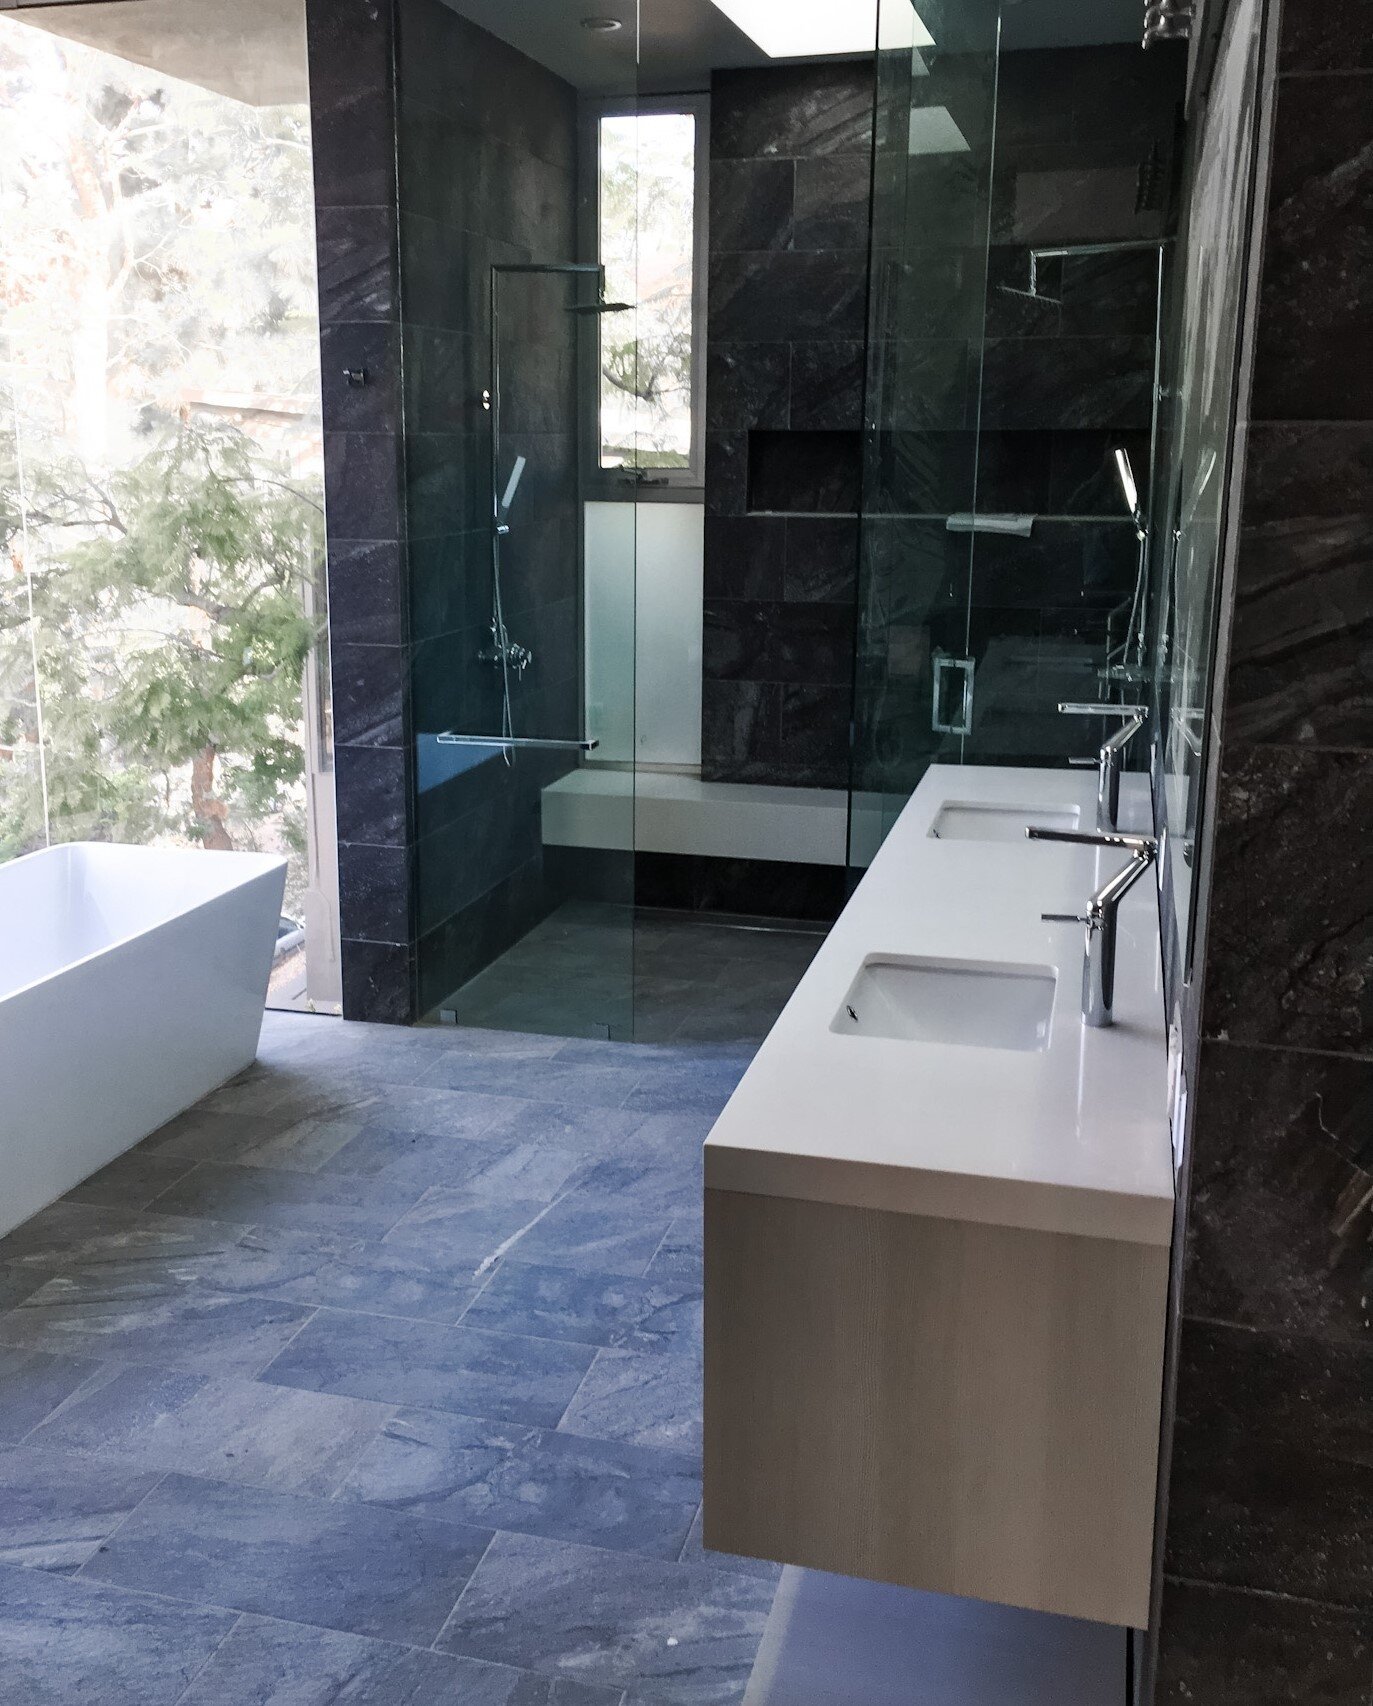 Modern bathroom inspiration from one of our recent projects. How stunning is that raindrop shower with built-in bench, and that view?!